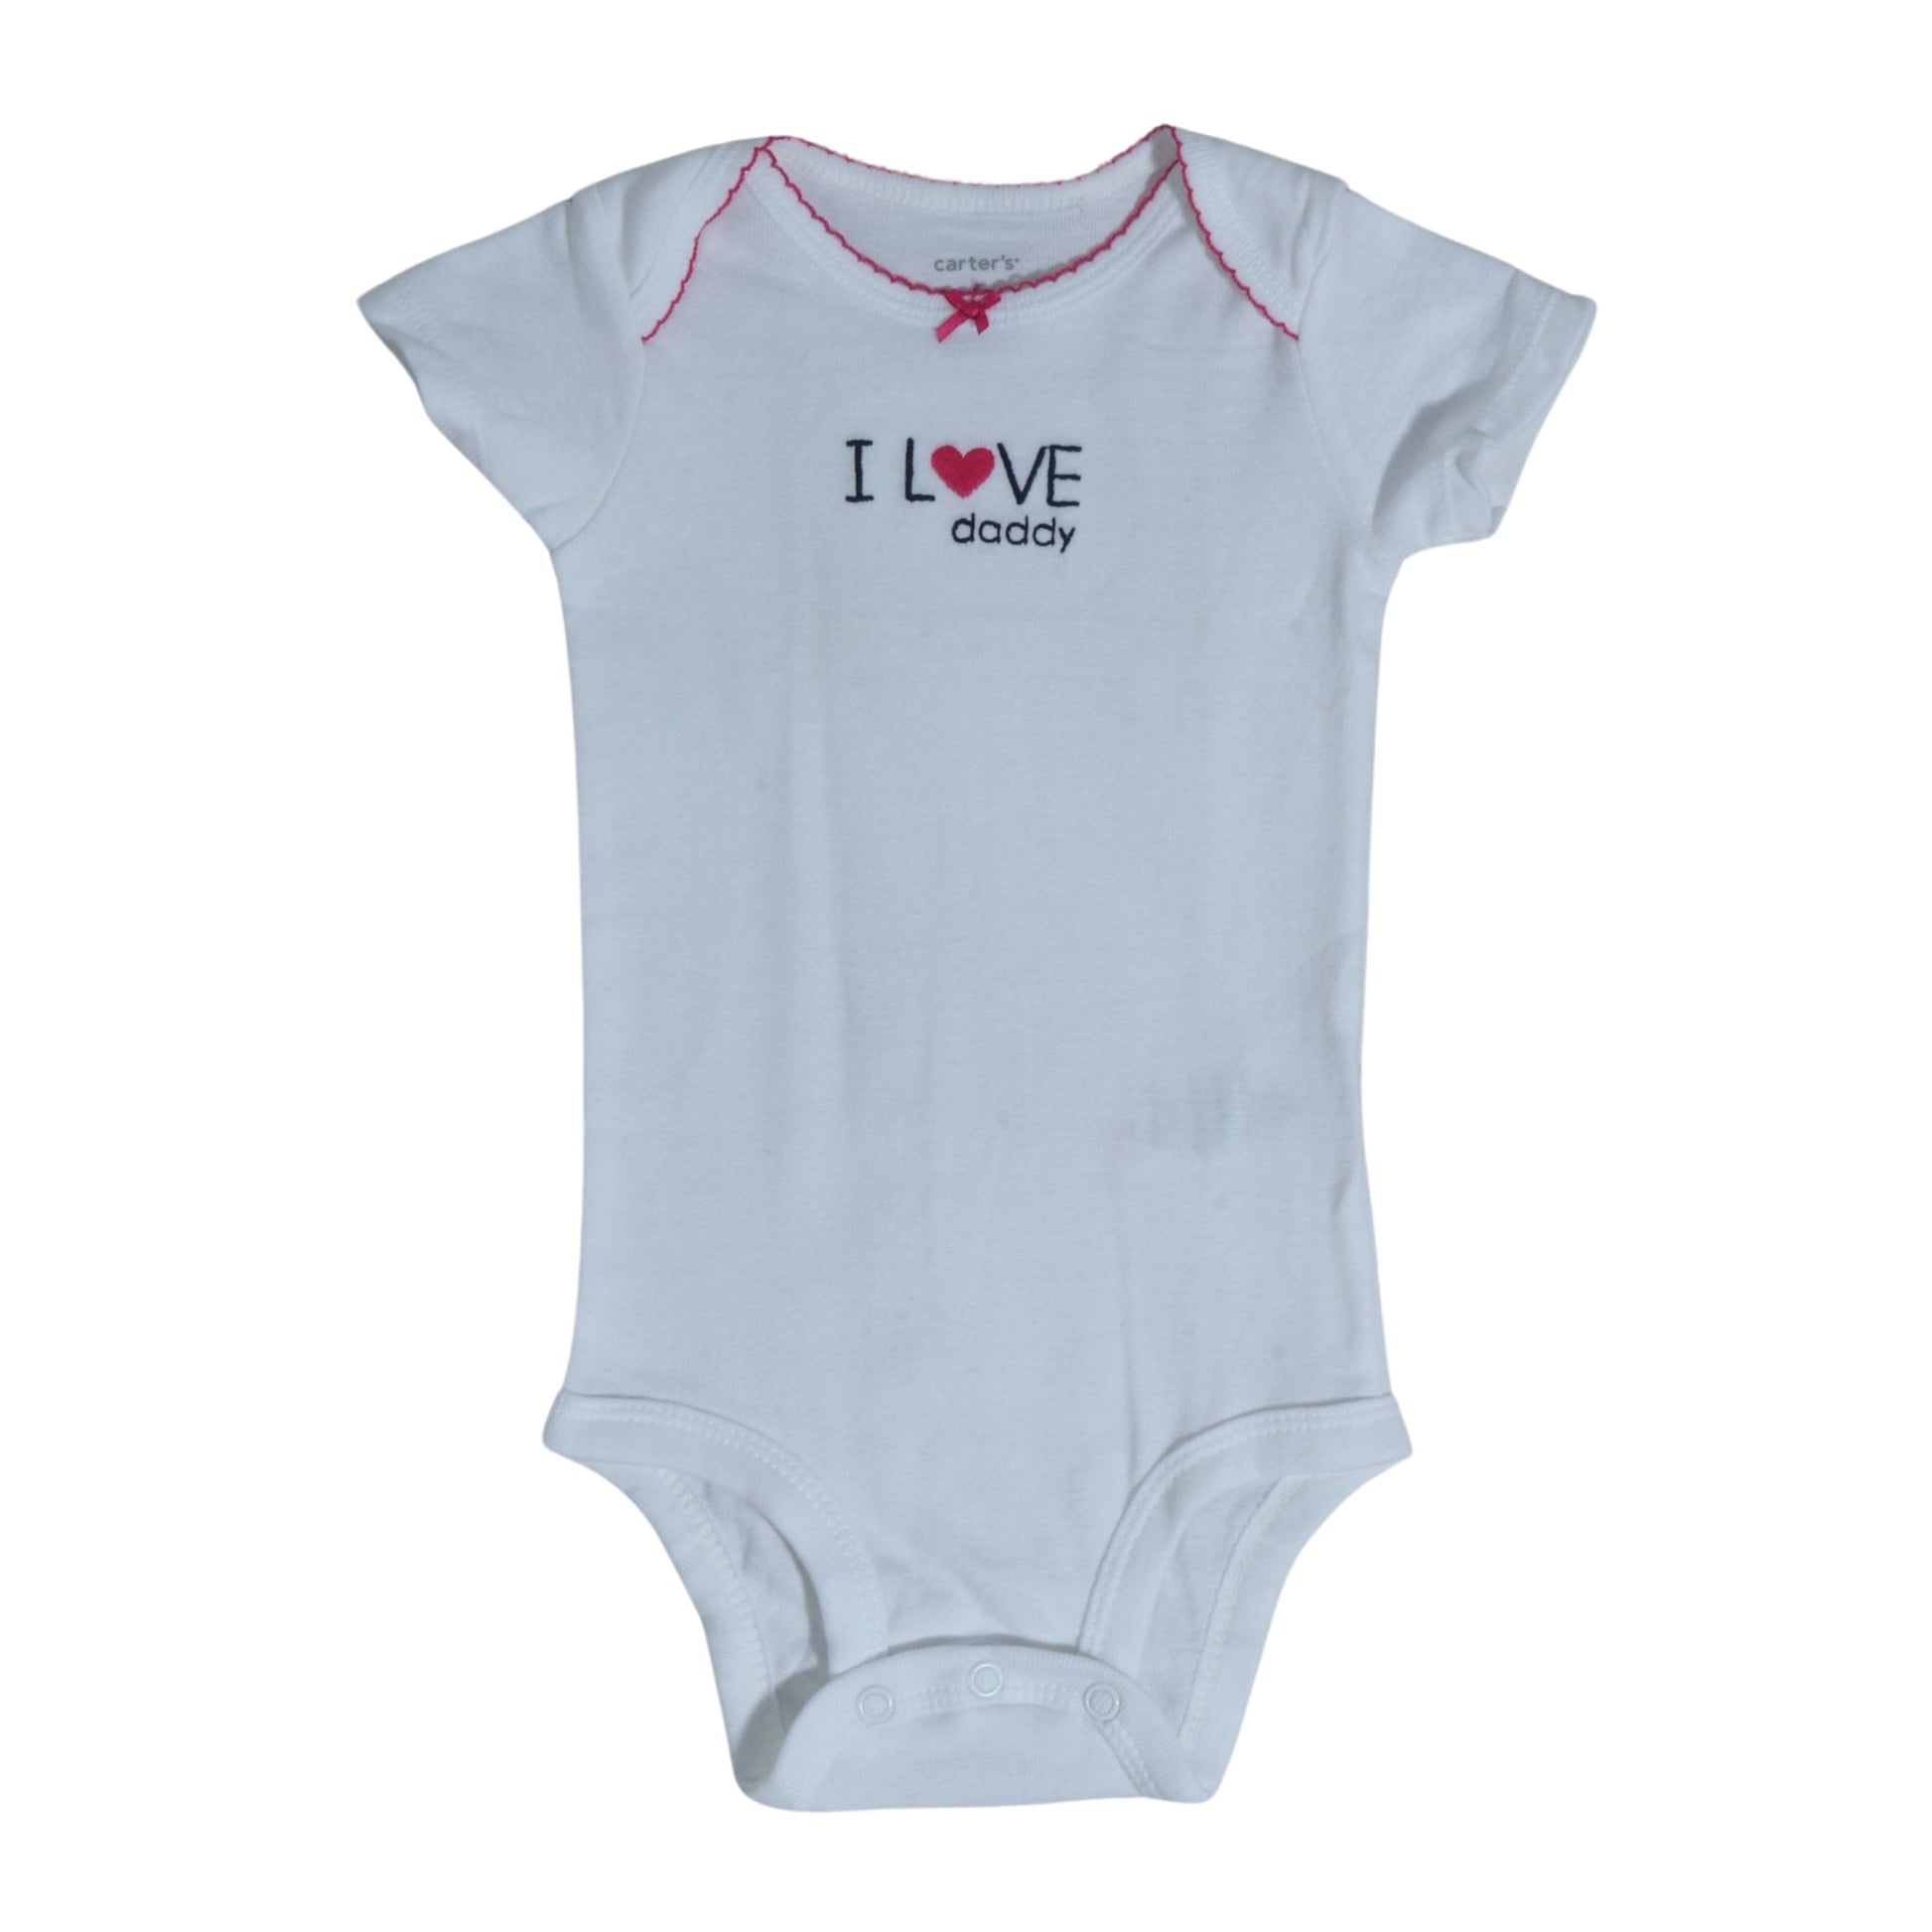 CARTER'S Baby Girl 6 Month / White CARTER'S - BABY - Graphic Bodysuits